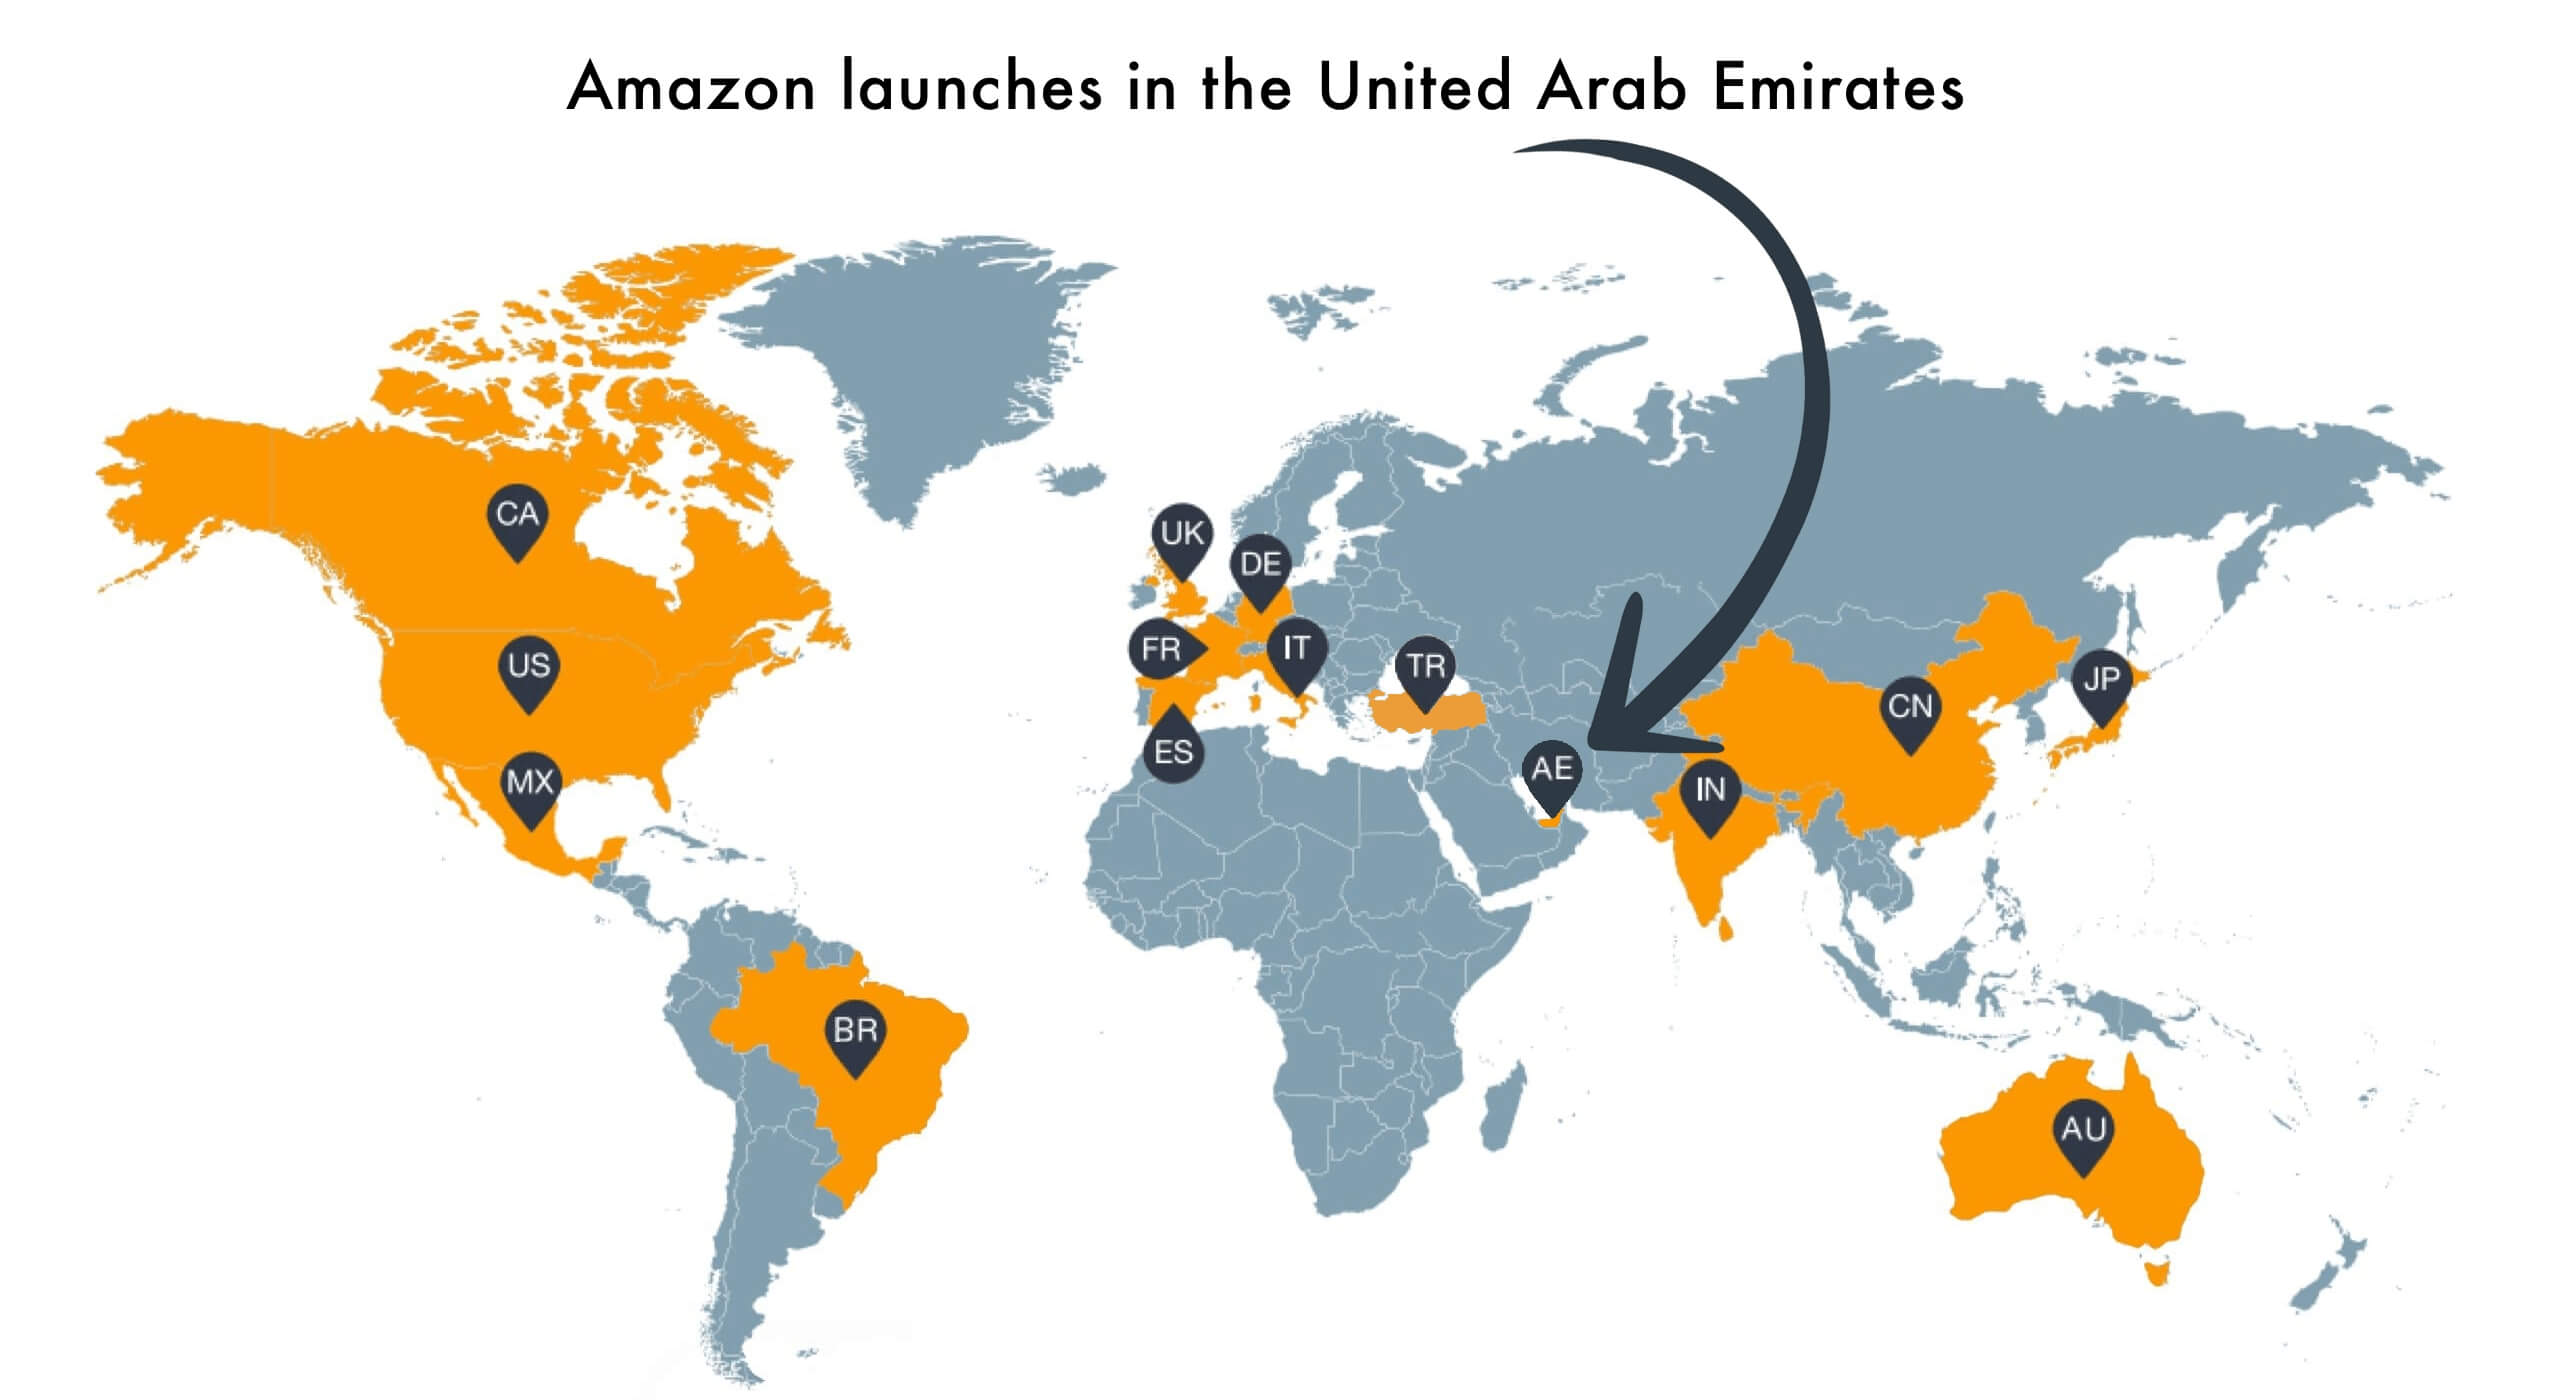 Amazon Launches in the United Arab Emirates